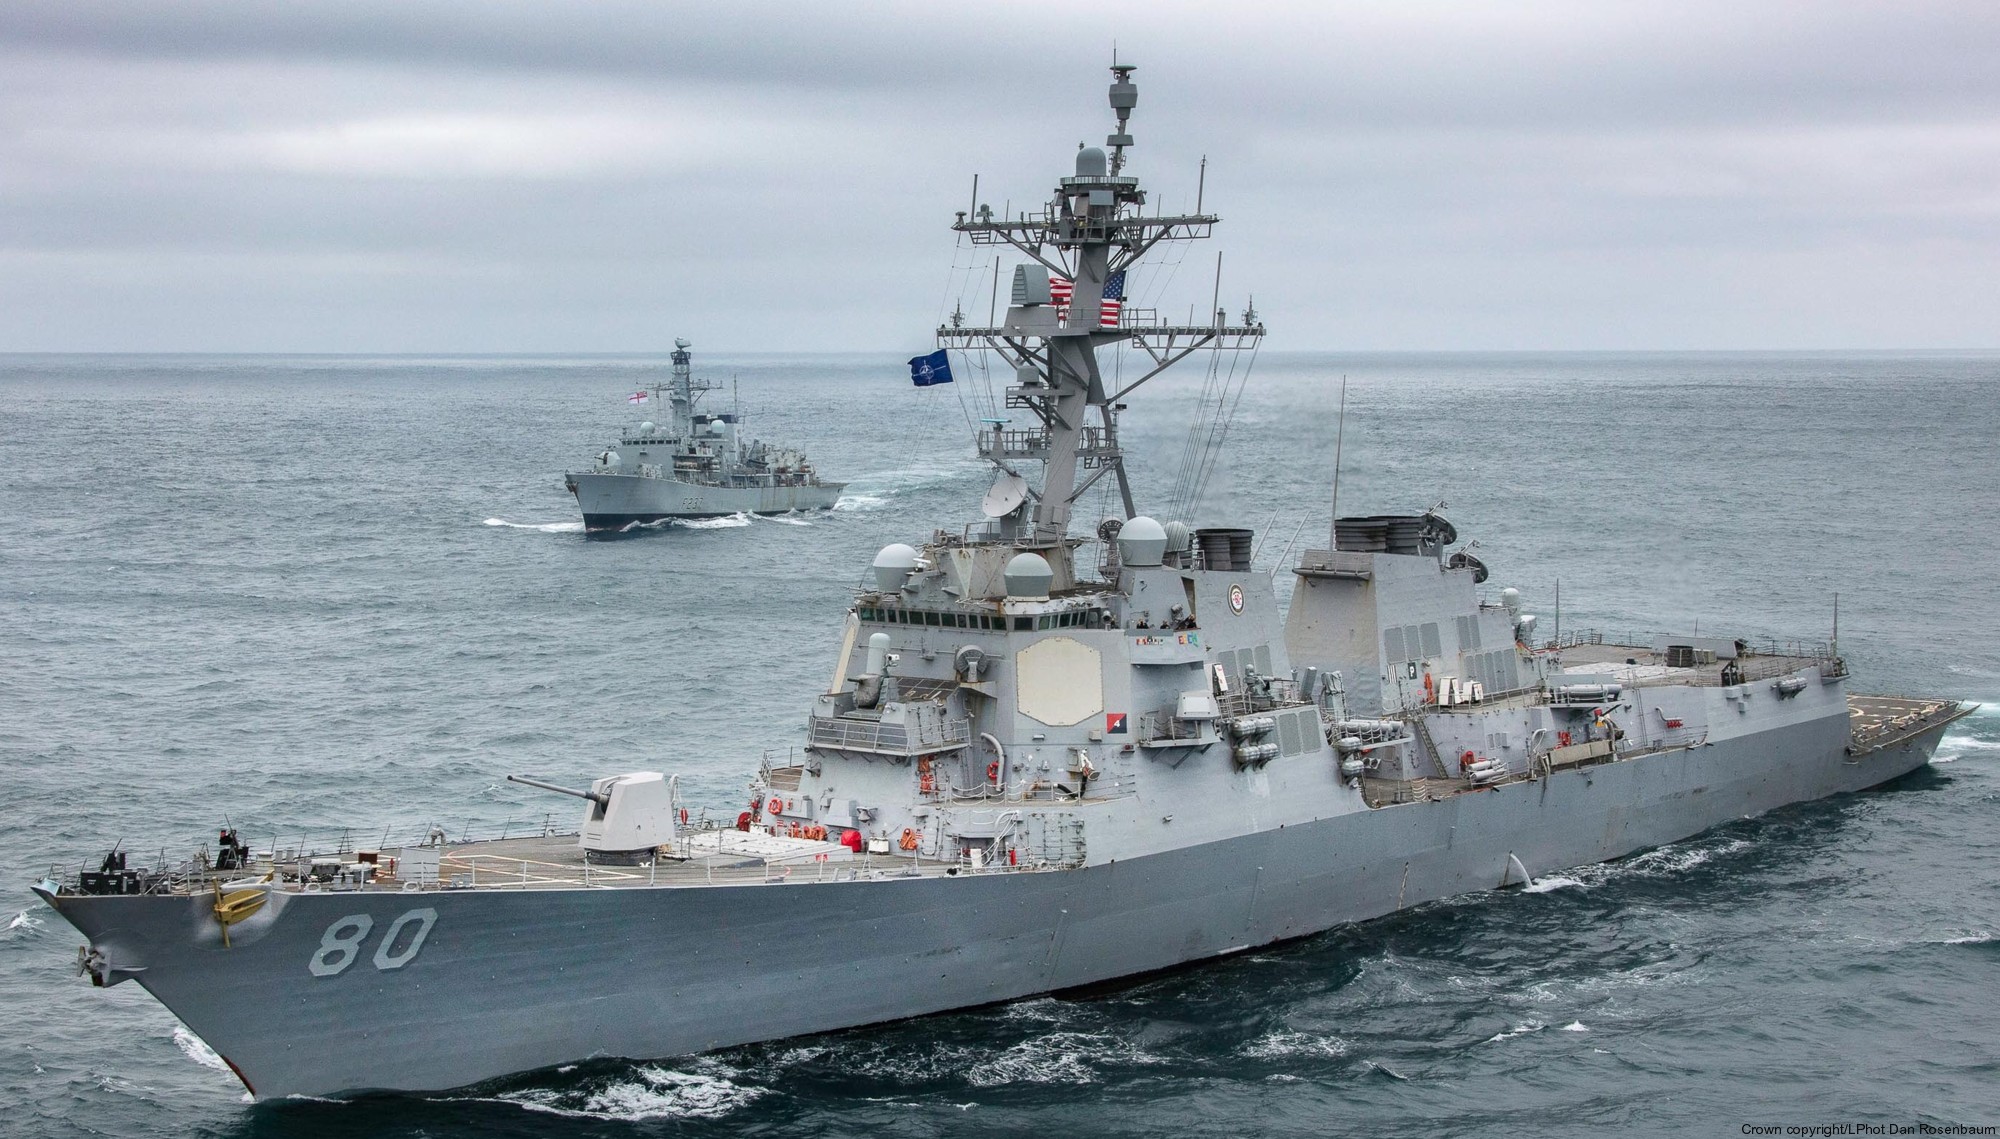 ddg-80 uss roosevelt guided missile destroyer arleigh burke class us navy nato dynamic mongoose 71